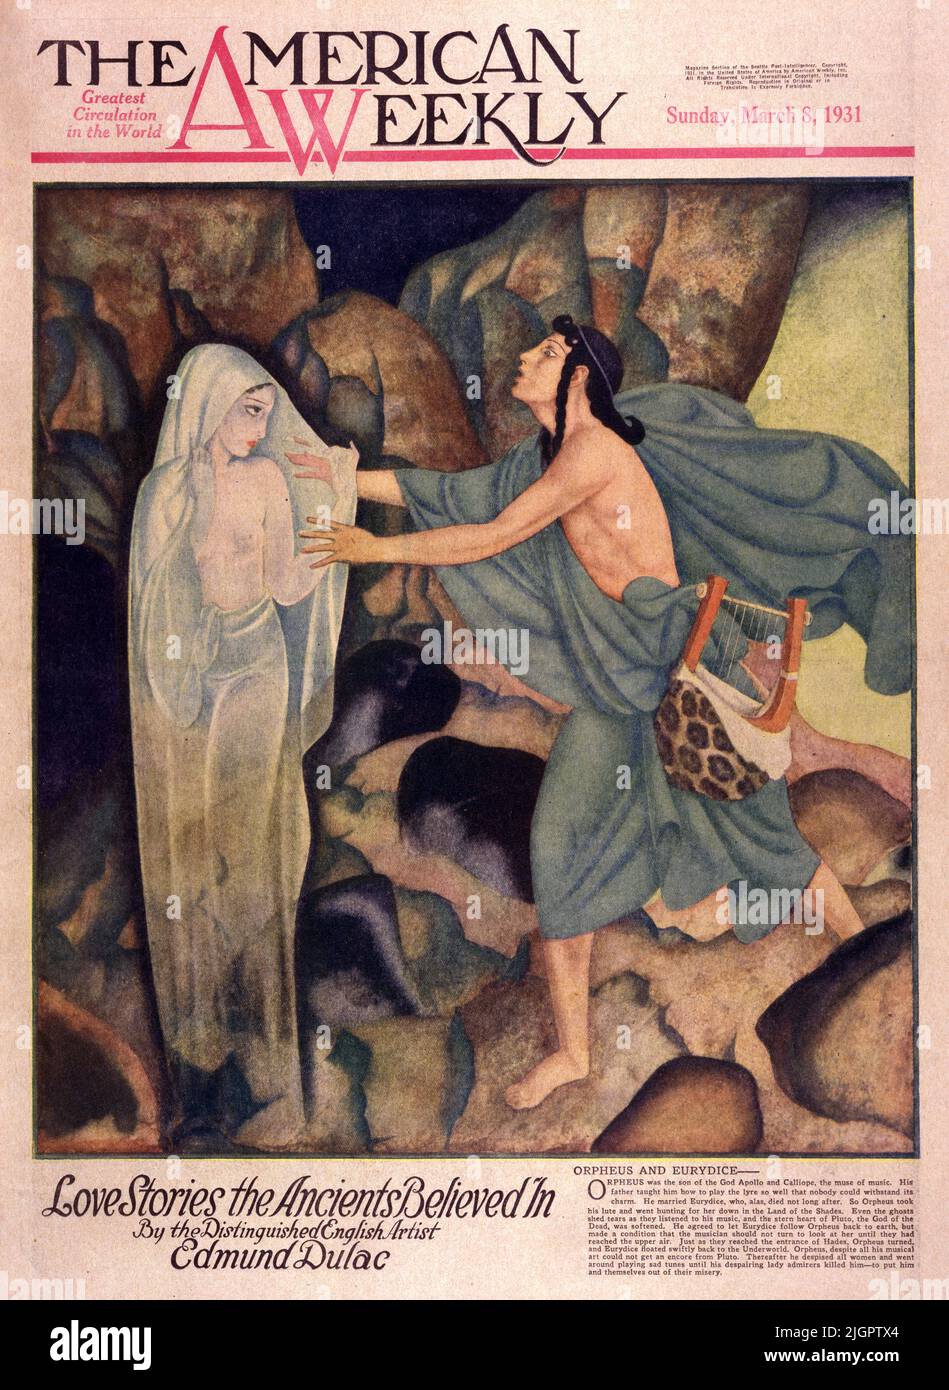 Orpheus and Eurydice published on March 8,1931 in the American Weekly magazine painted by Edmund Dulac. Orpheus was the son of the God Apollo and Calliope, the muse of music. His father taught him how to play the lyre so well that nobody could withstand its charm. He married Euridice, who, alas, died not long after. So Orpheus took his lute and went hunting for her down in the land of the Shades. Even the ghosts shed tears as they listened to his music, and the stern heart of Pluto, the God of the Dead, was softened. He agreed to let Euridice follow Orpheus back to earth, but made a condition. Stock Photo